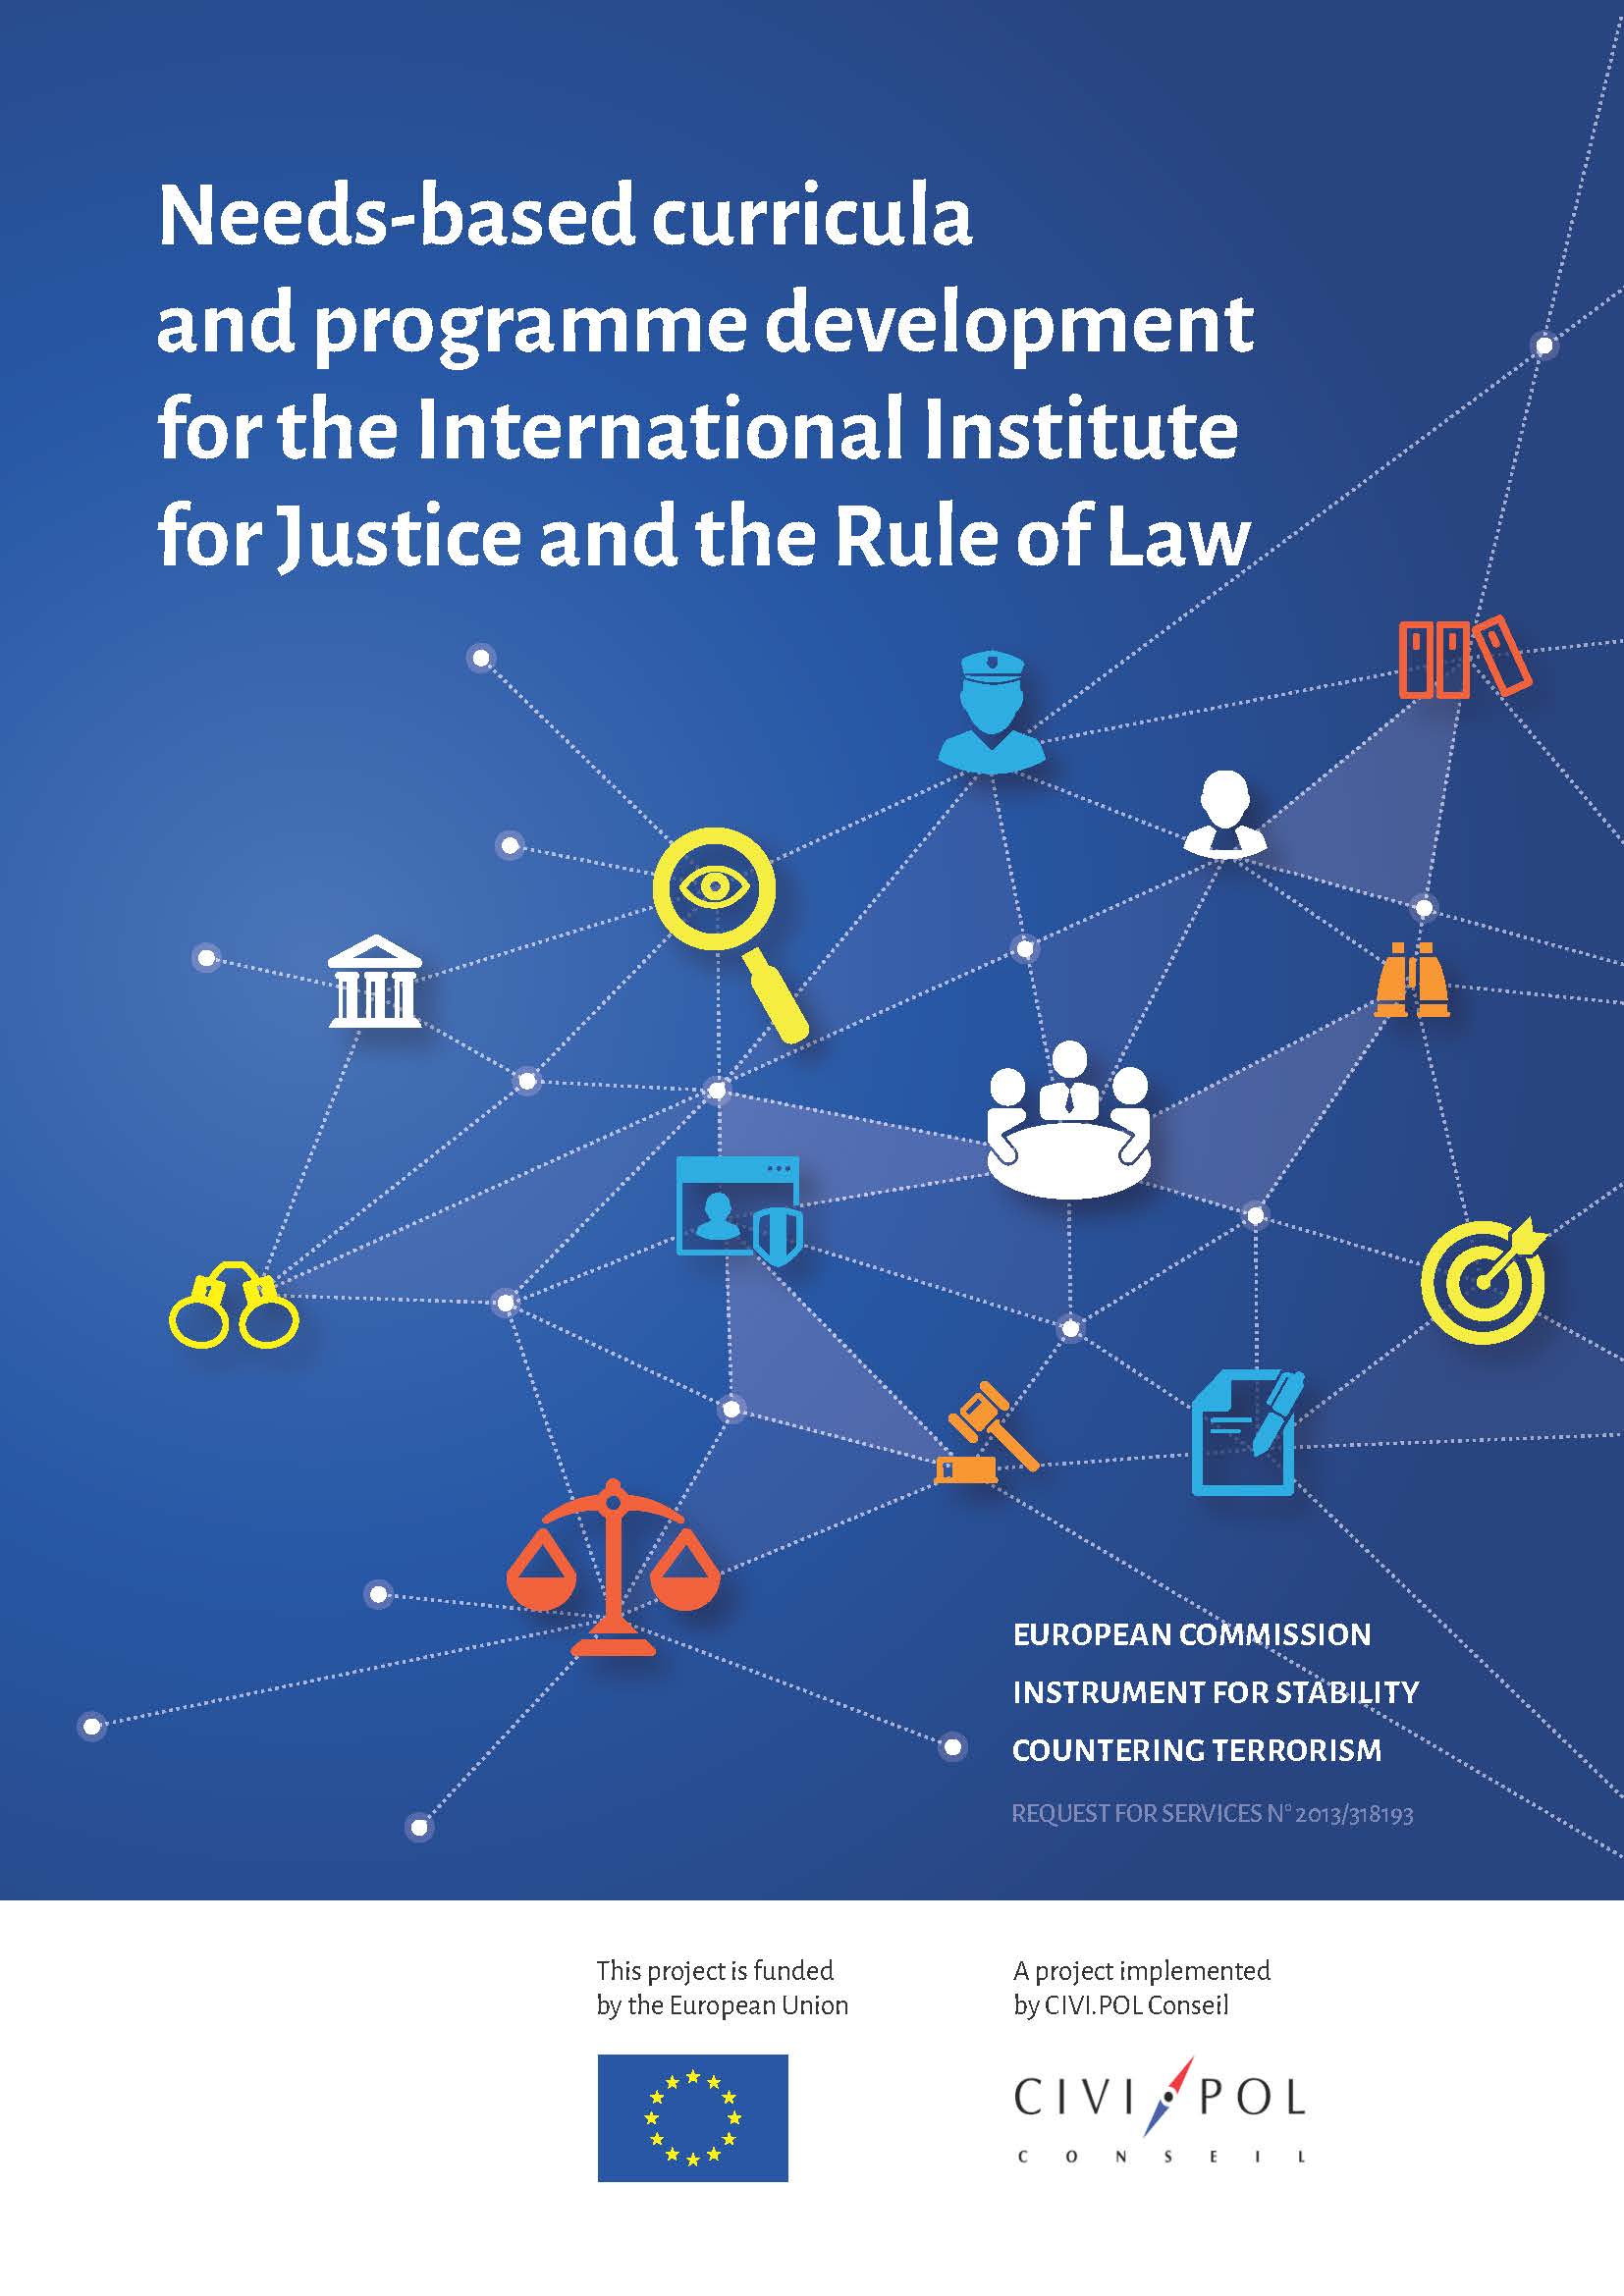 Needs-based Curricula and Programme Development for the International Institute for Justice and the Rule of Law